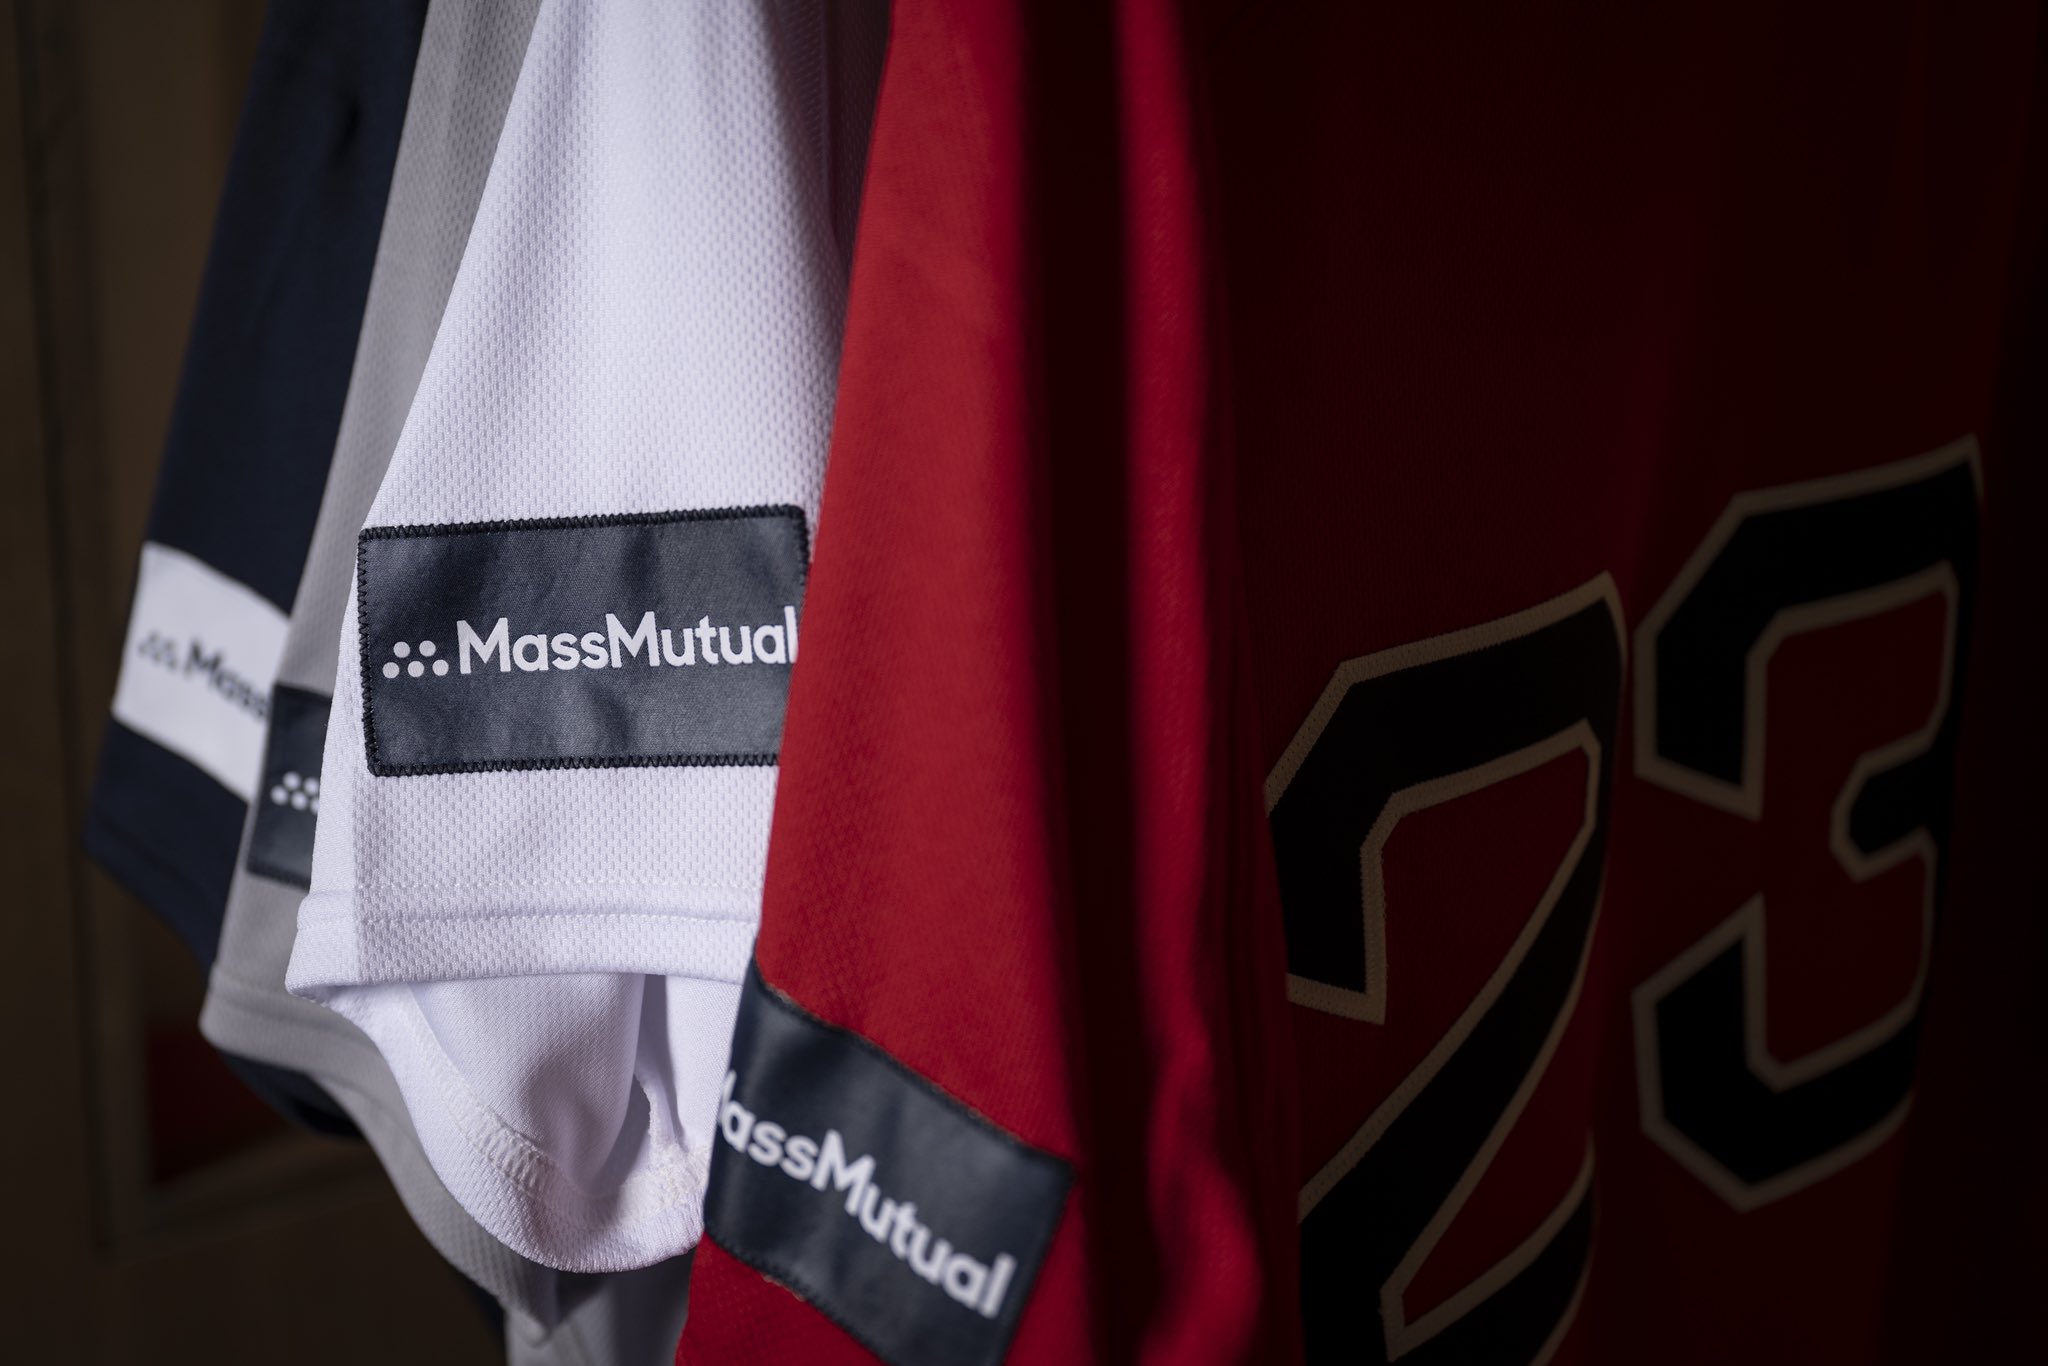 Red Sox on X: A new look on a classic jersey!  / X